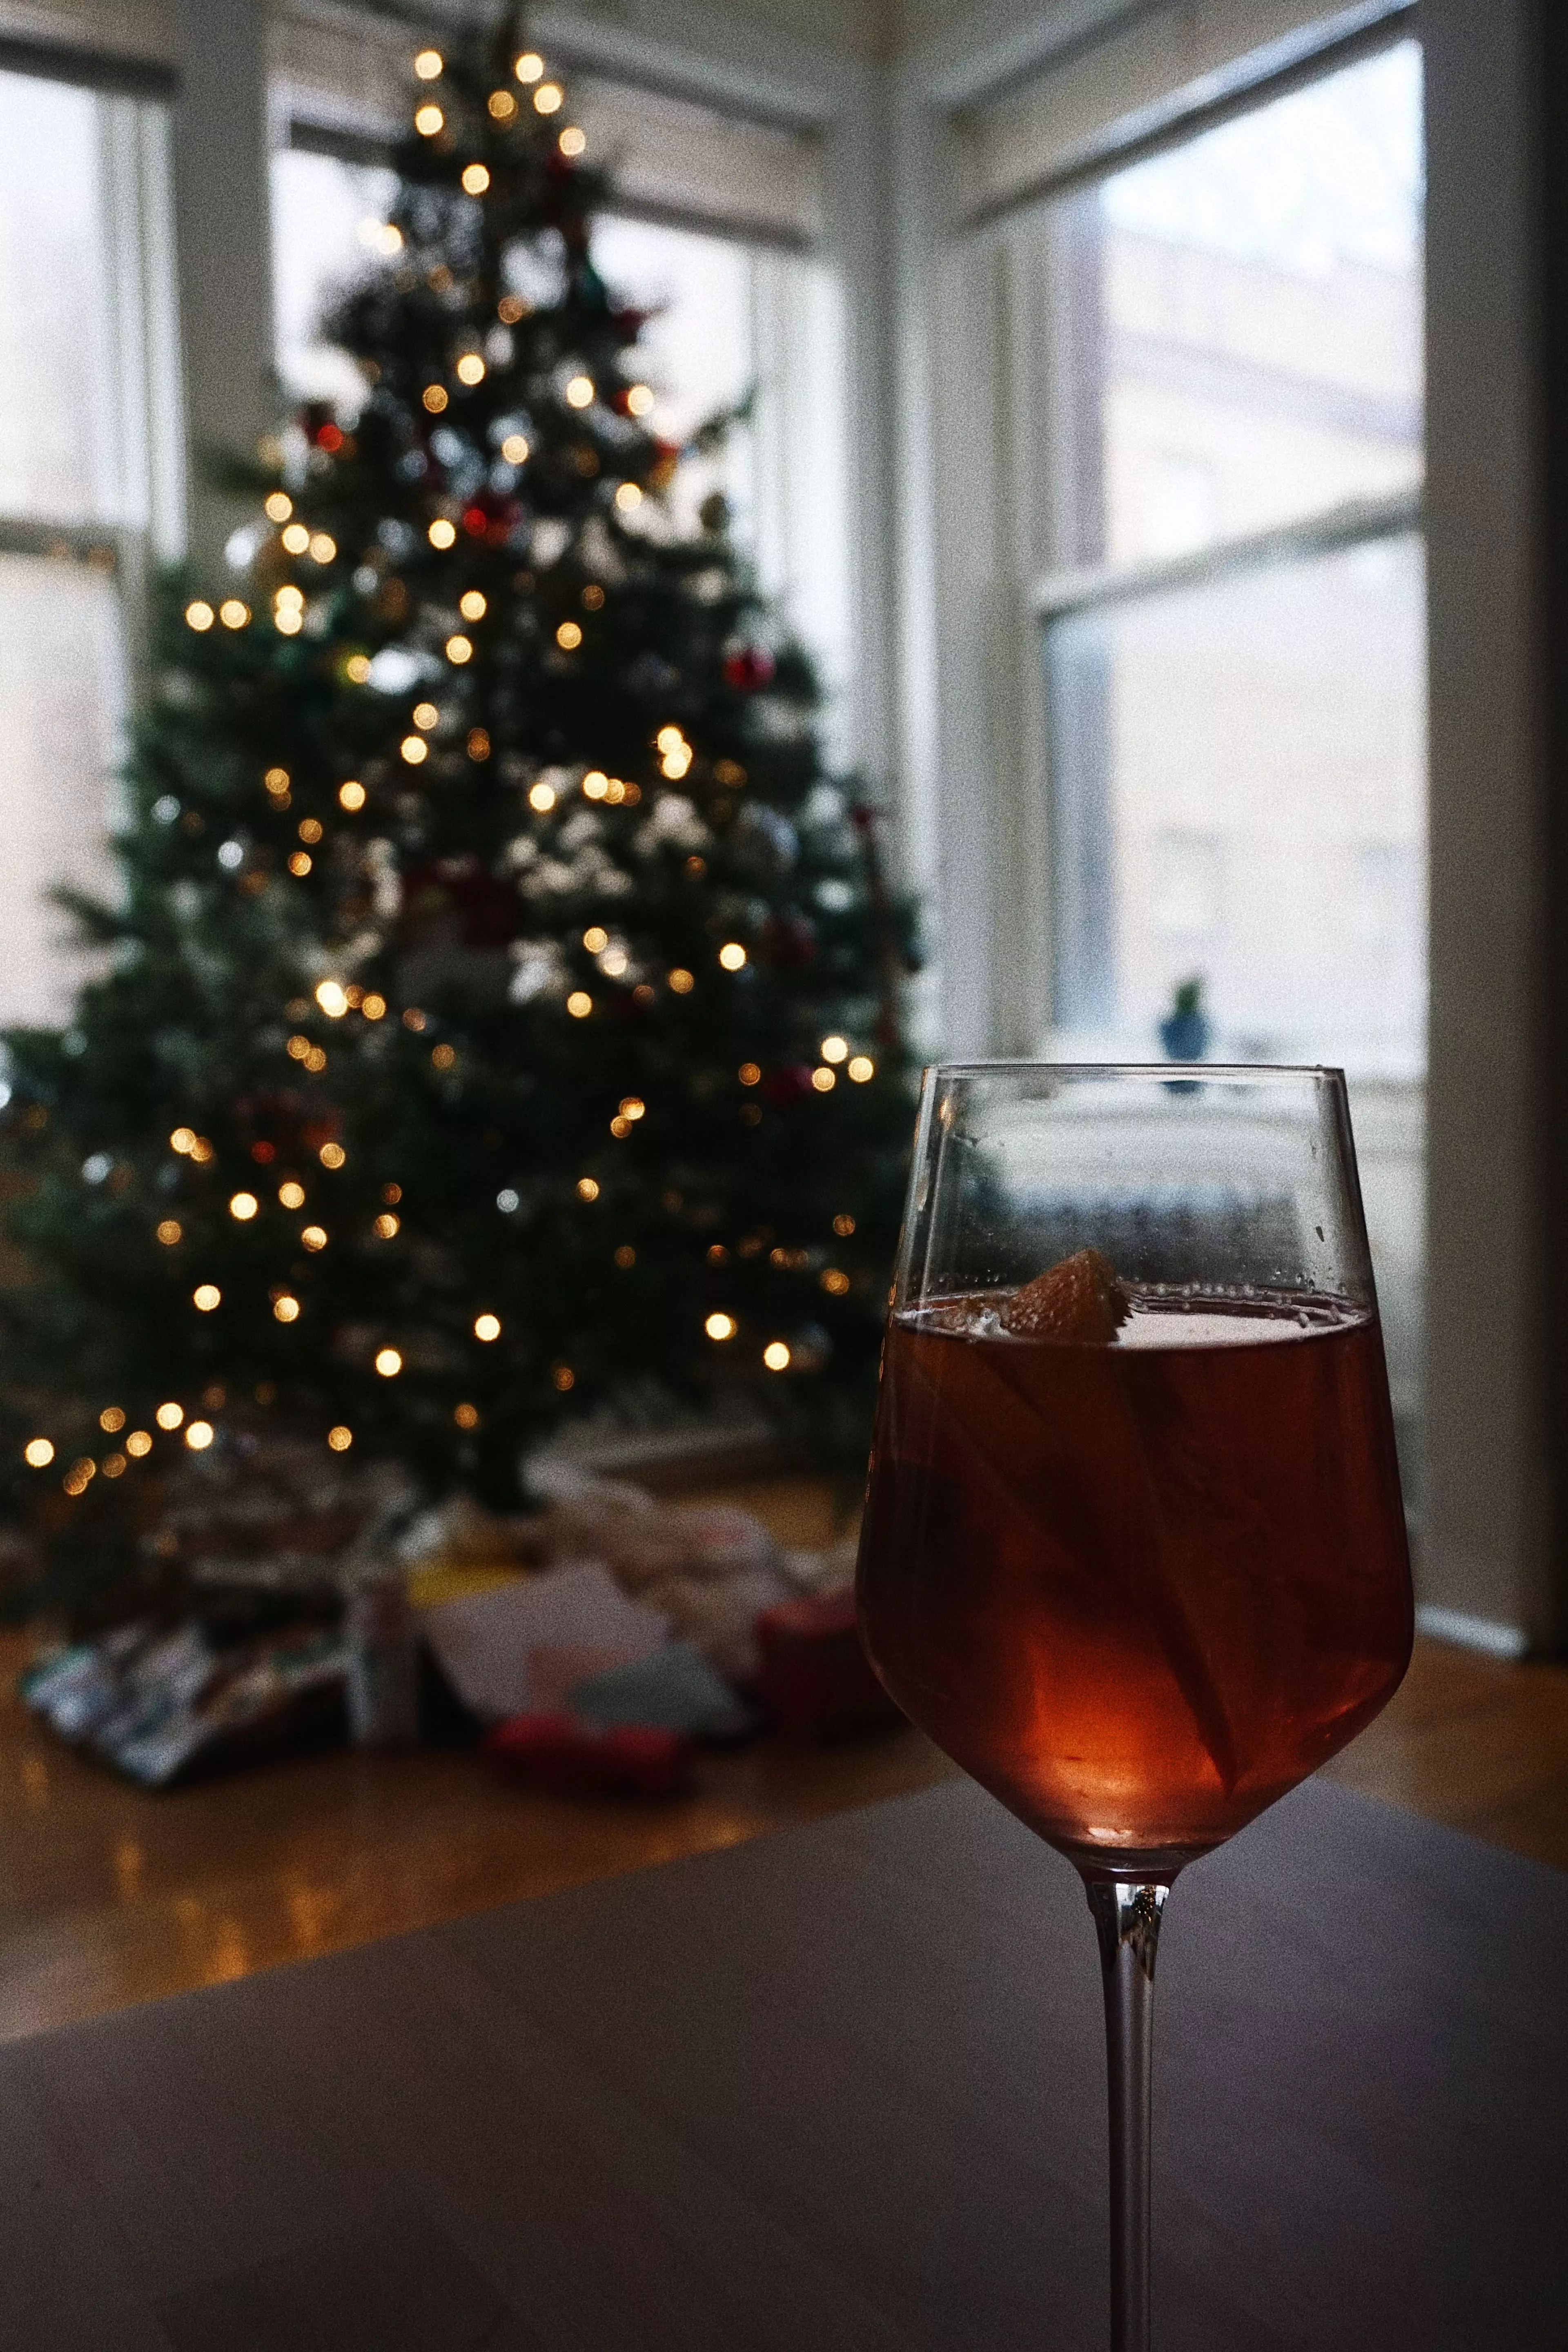 Drink in moderation at Christmas (